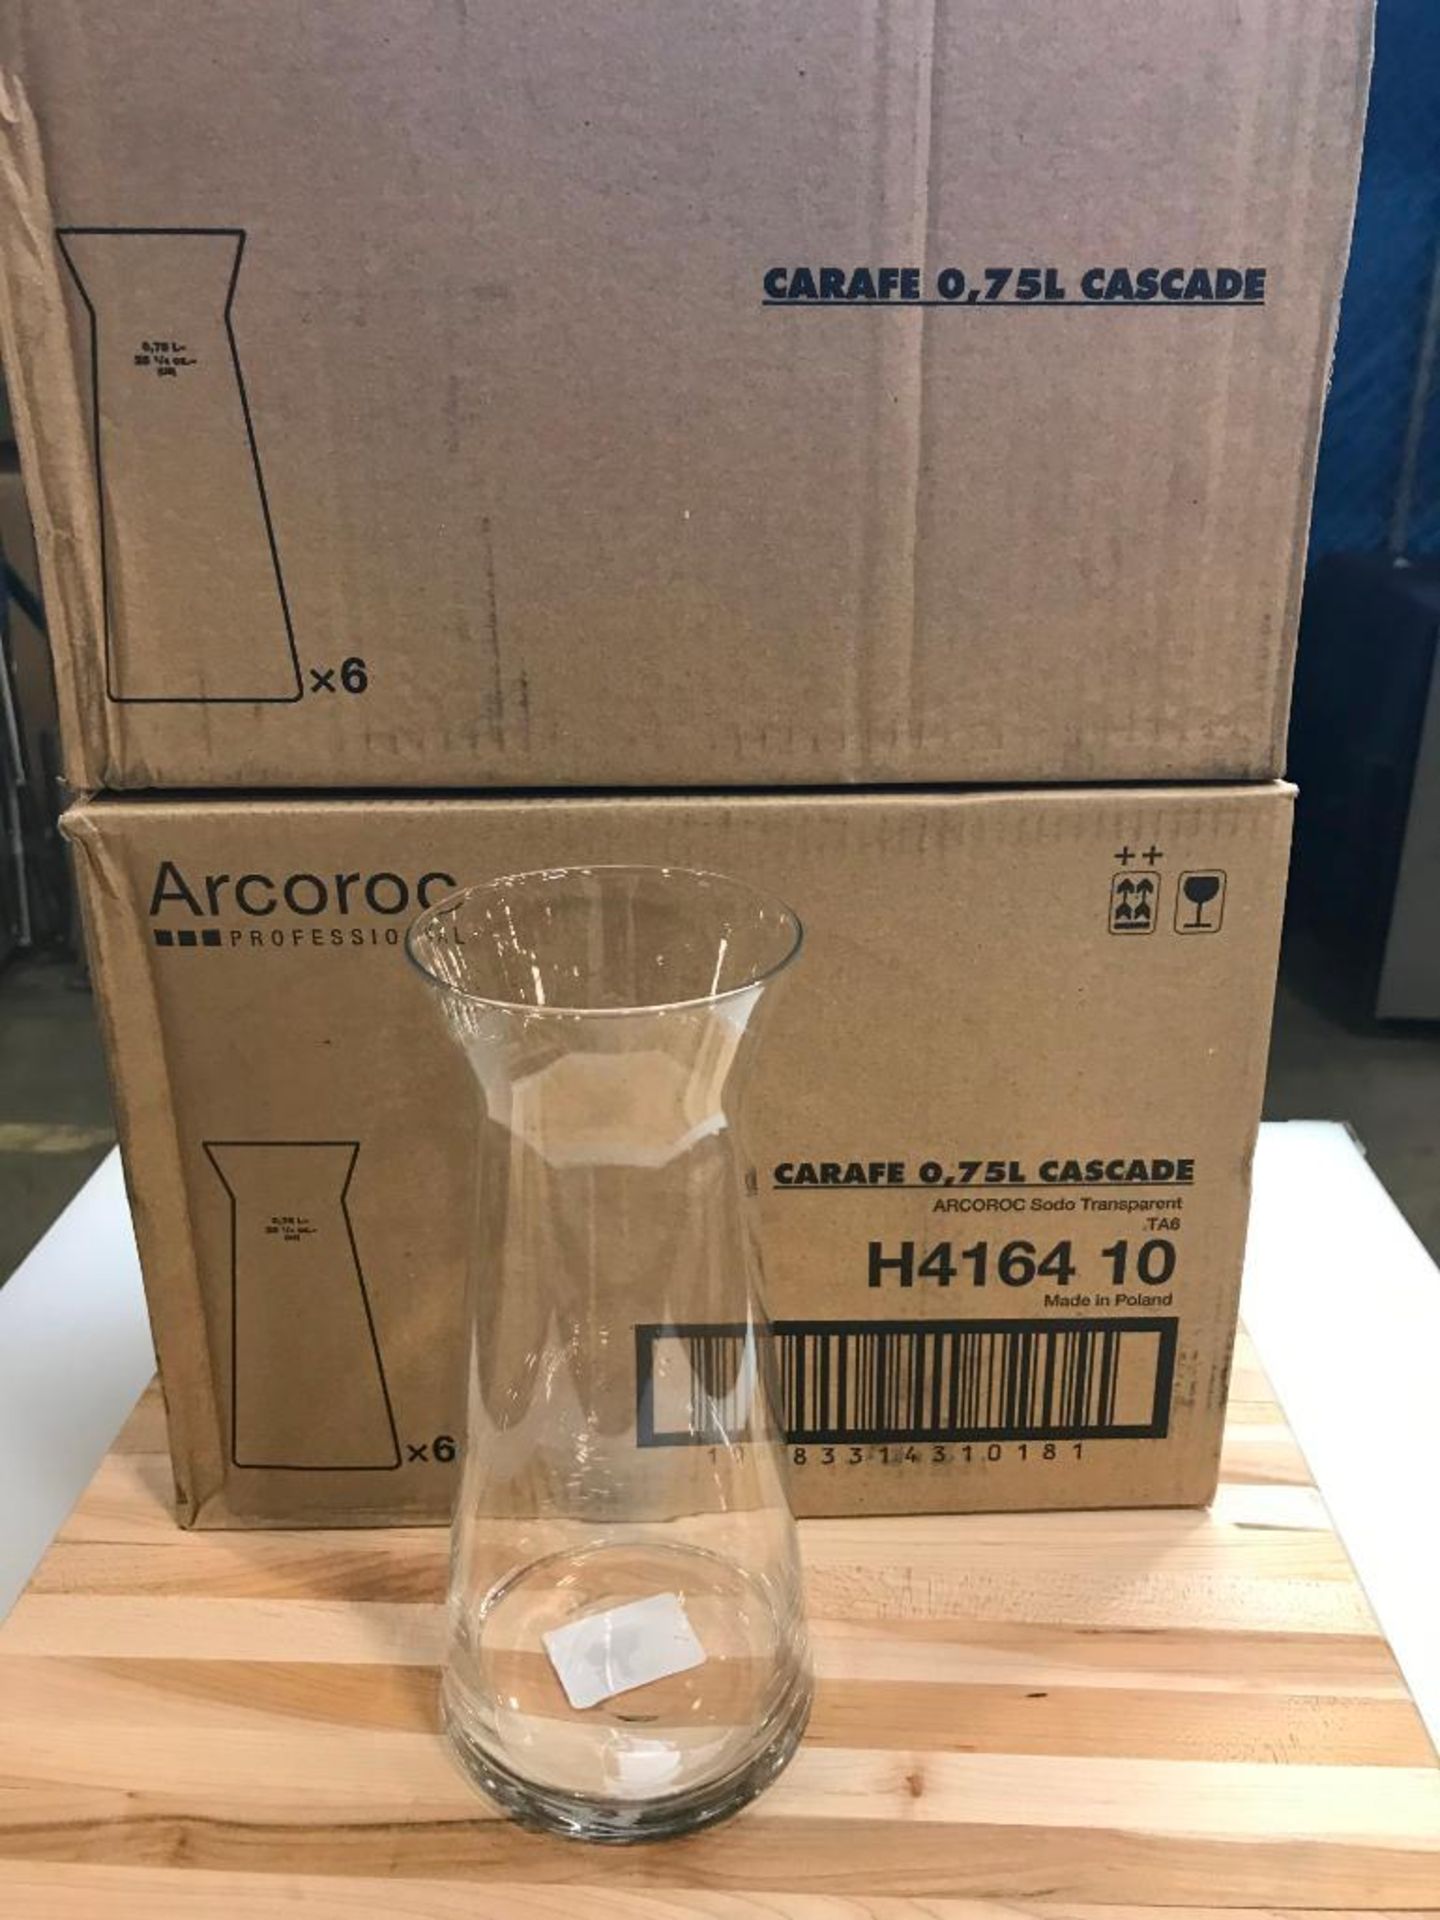 4 CASES OF ARCOROC H4164 CASCADE 25 OZ DECANTER - LOT OF 24 - NEW - Image 3 of 3